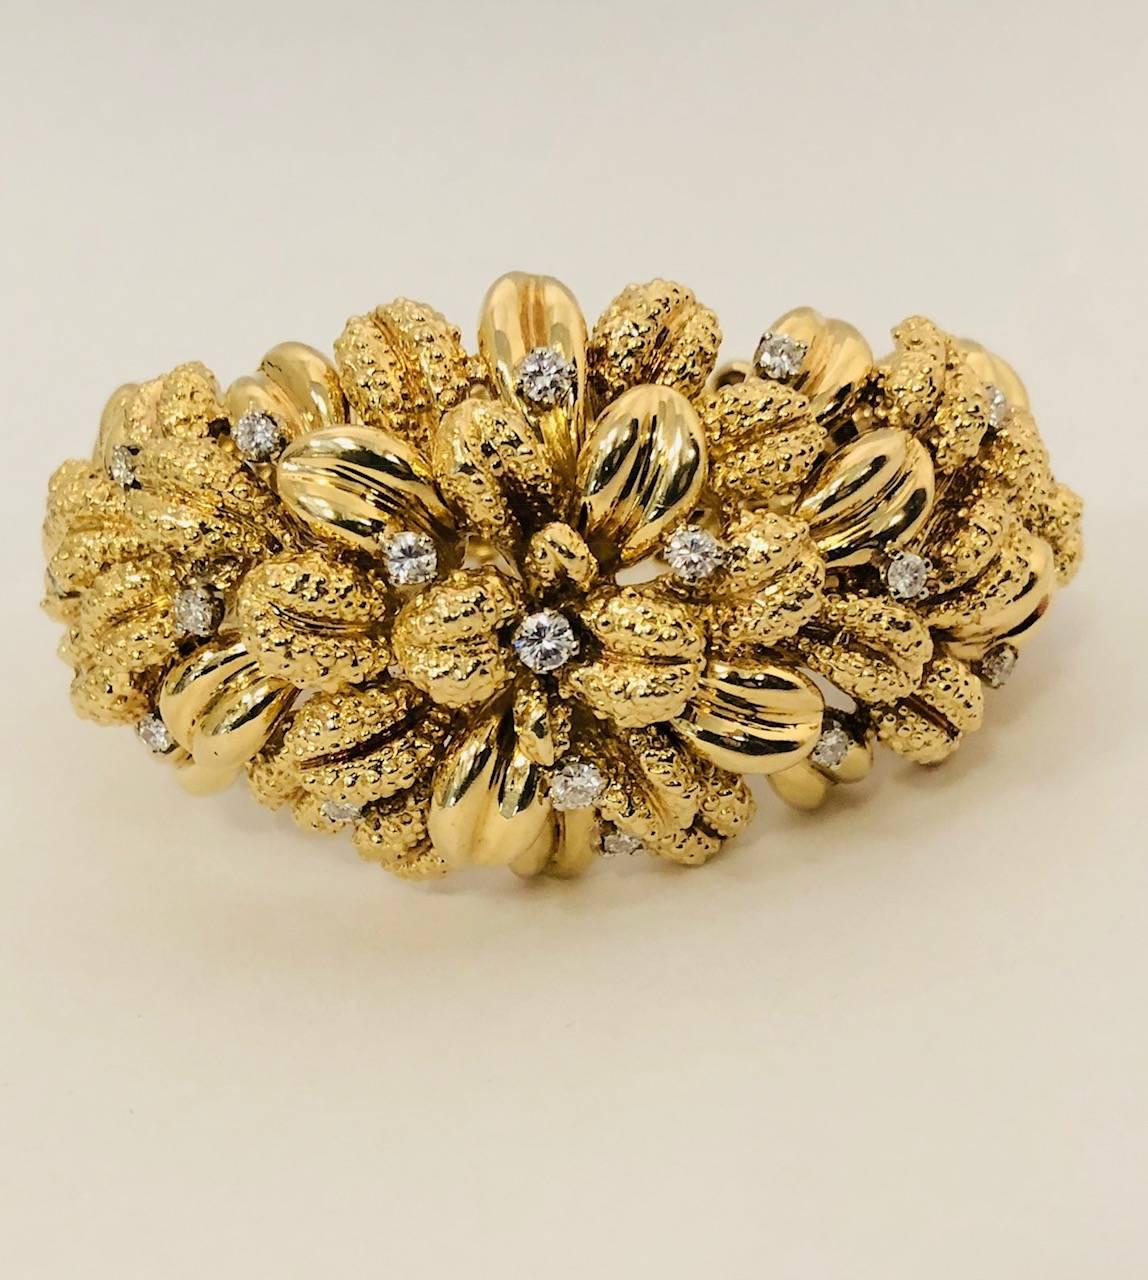 This stunning bracelet was purchased at a Christies Auction in 1960s for $18000 when gold sold at $36 an ounce! This meticulously crafted bracelet, in 18 karat yellow gold, is beyond notable! High polished and knobby finished 'leaves' are sprinkled